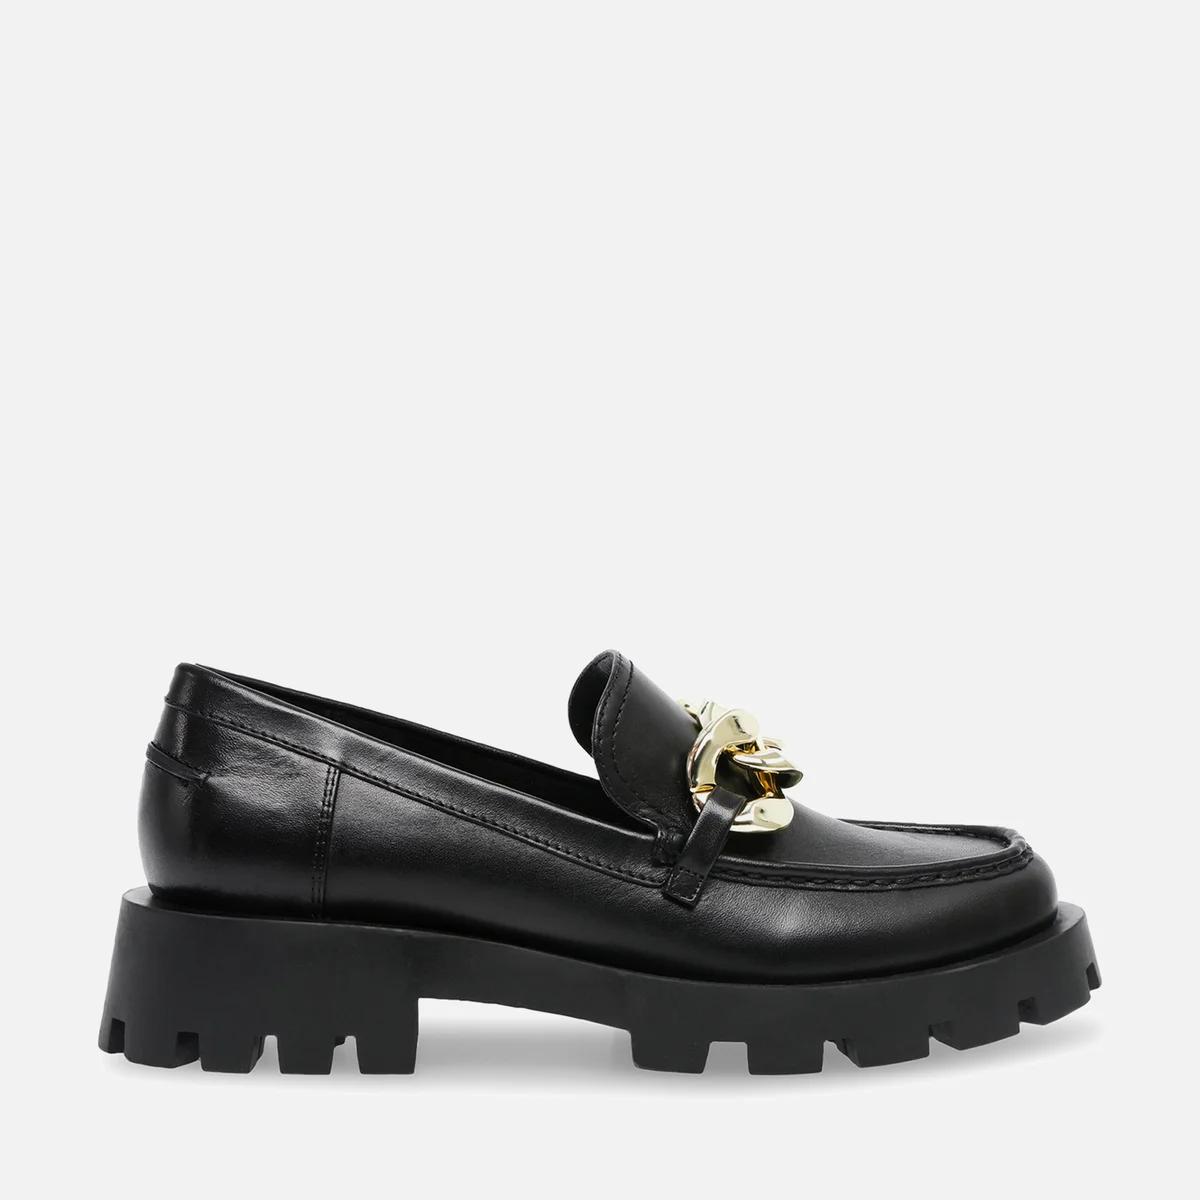 Steve Madden Mix Up Leather Loafers Image 1